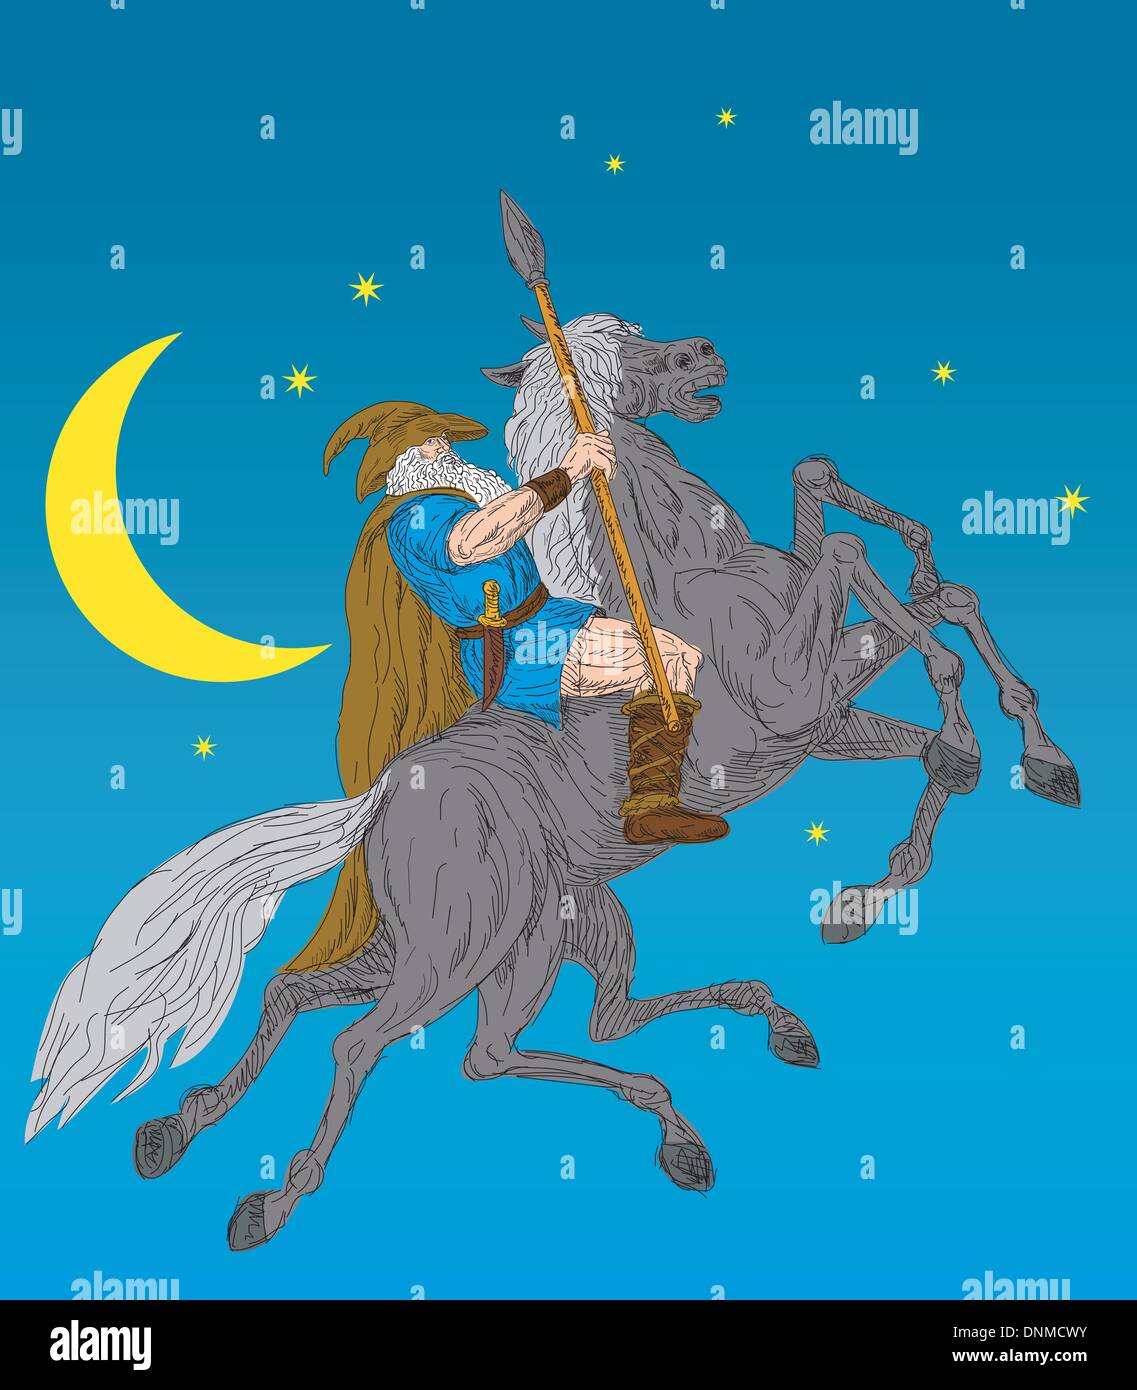 illustration of the Norse God Odin riding eight-legged horse, Sleipner in the wild hunt. Hand   sketched and drawn. Stock Vector